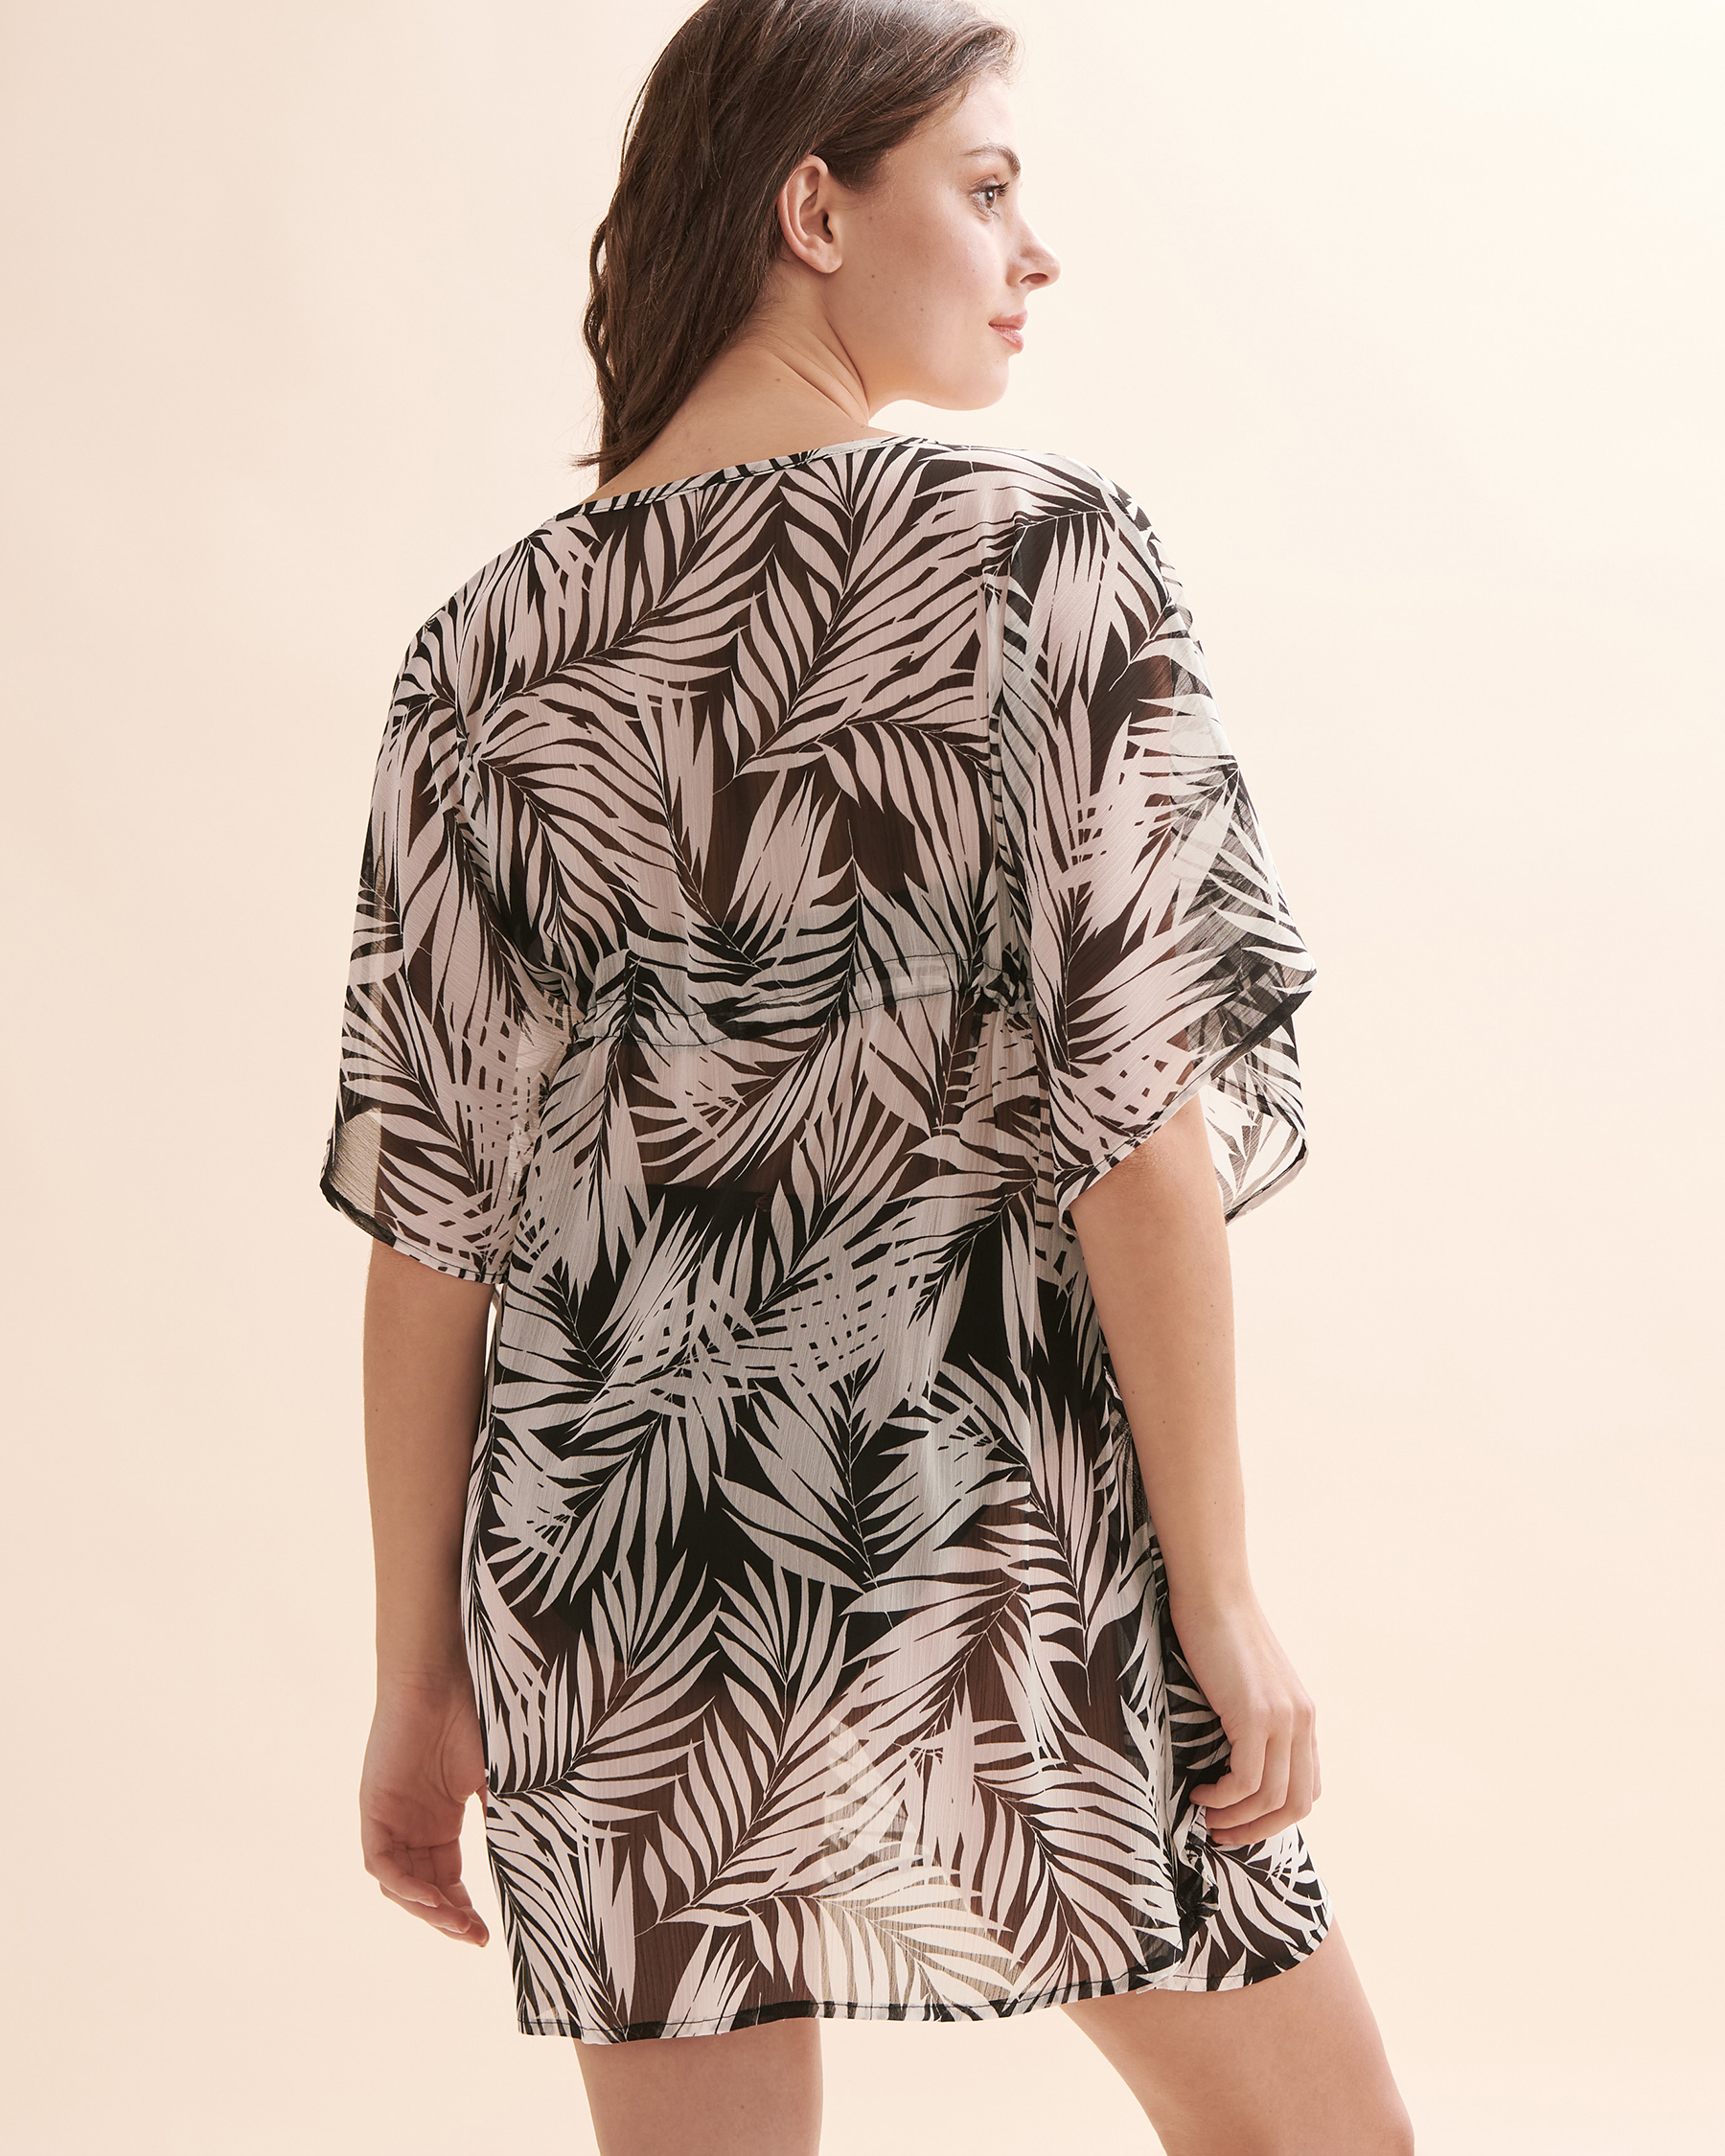 COVER ME Paradise Found Chiffon Caftan Black and white print 23052216 - View2